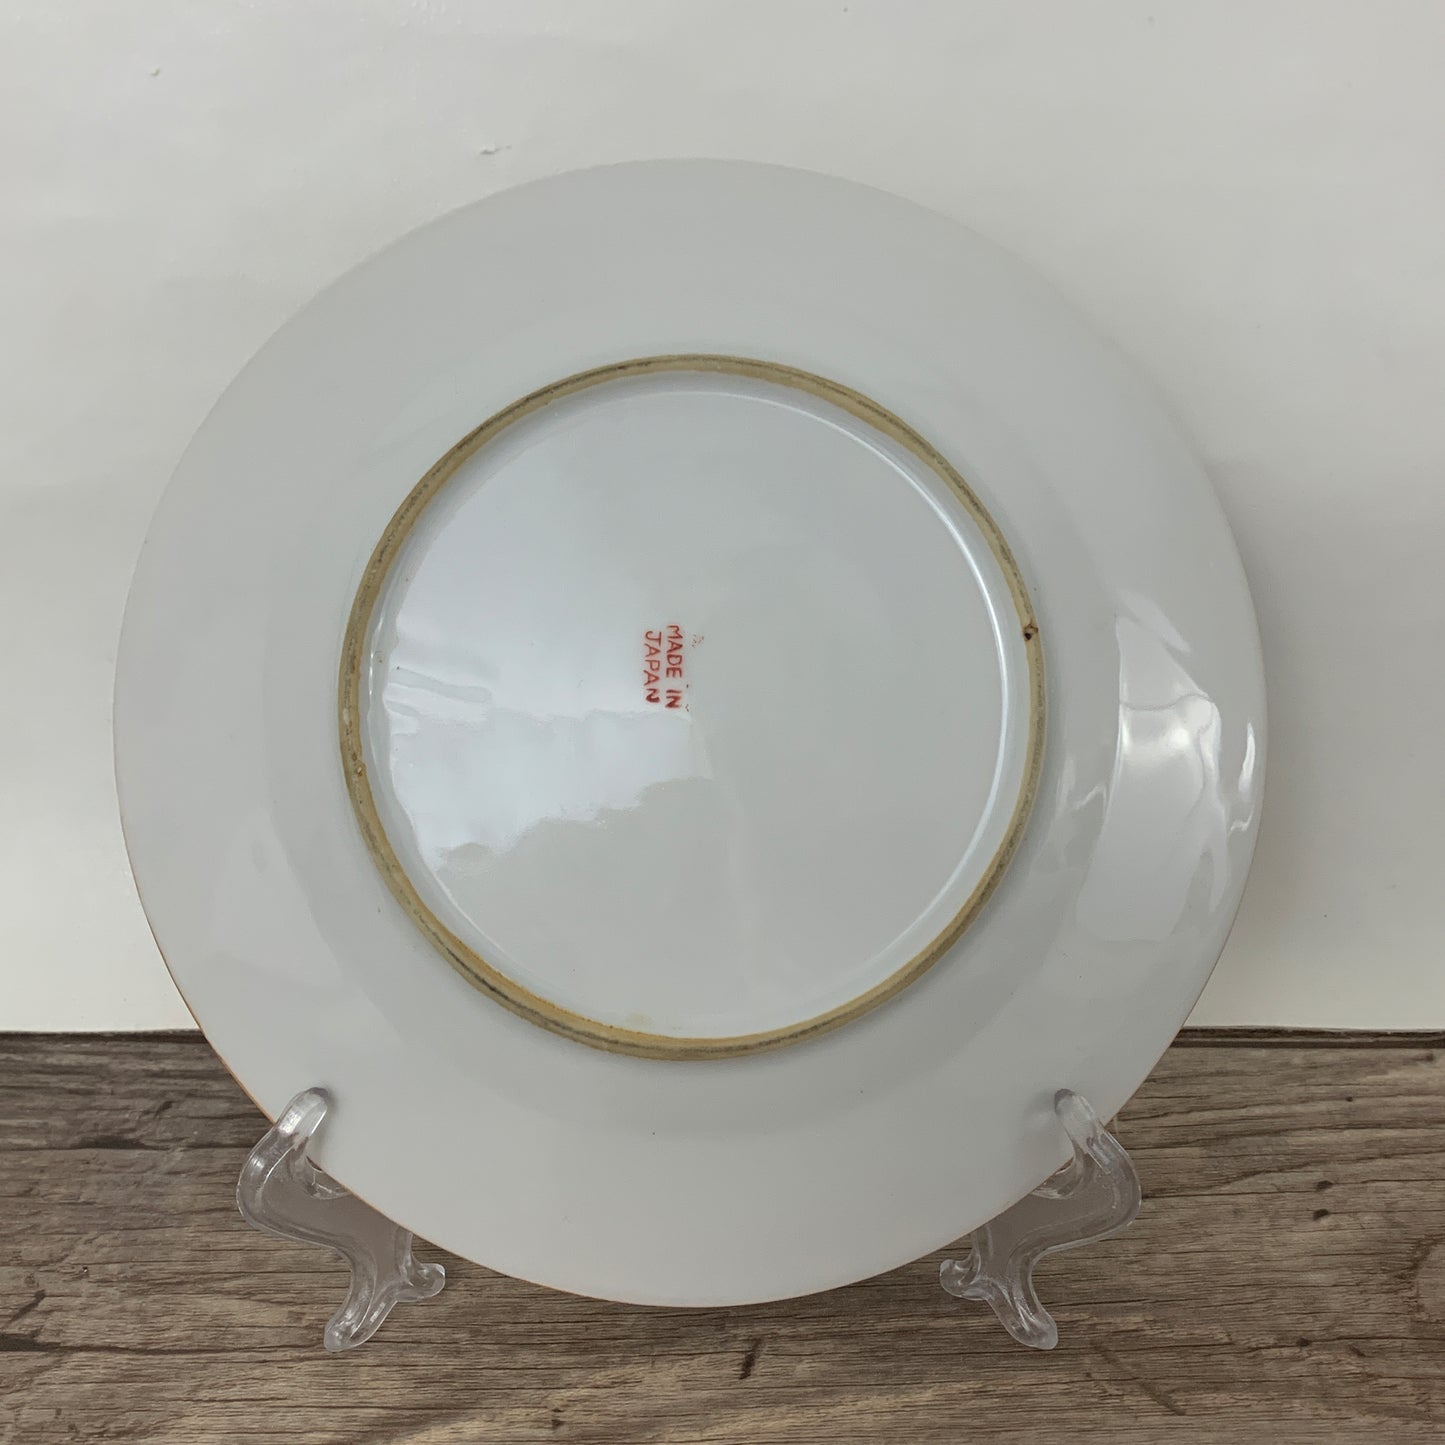 Japan Lusterware Bread Plates with Floral Pattern, Set of 4